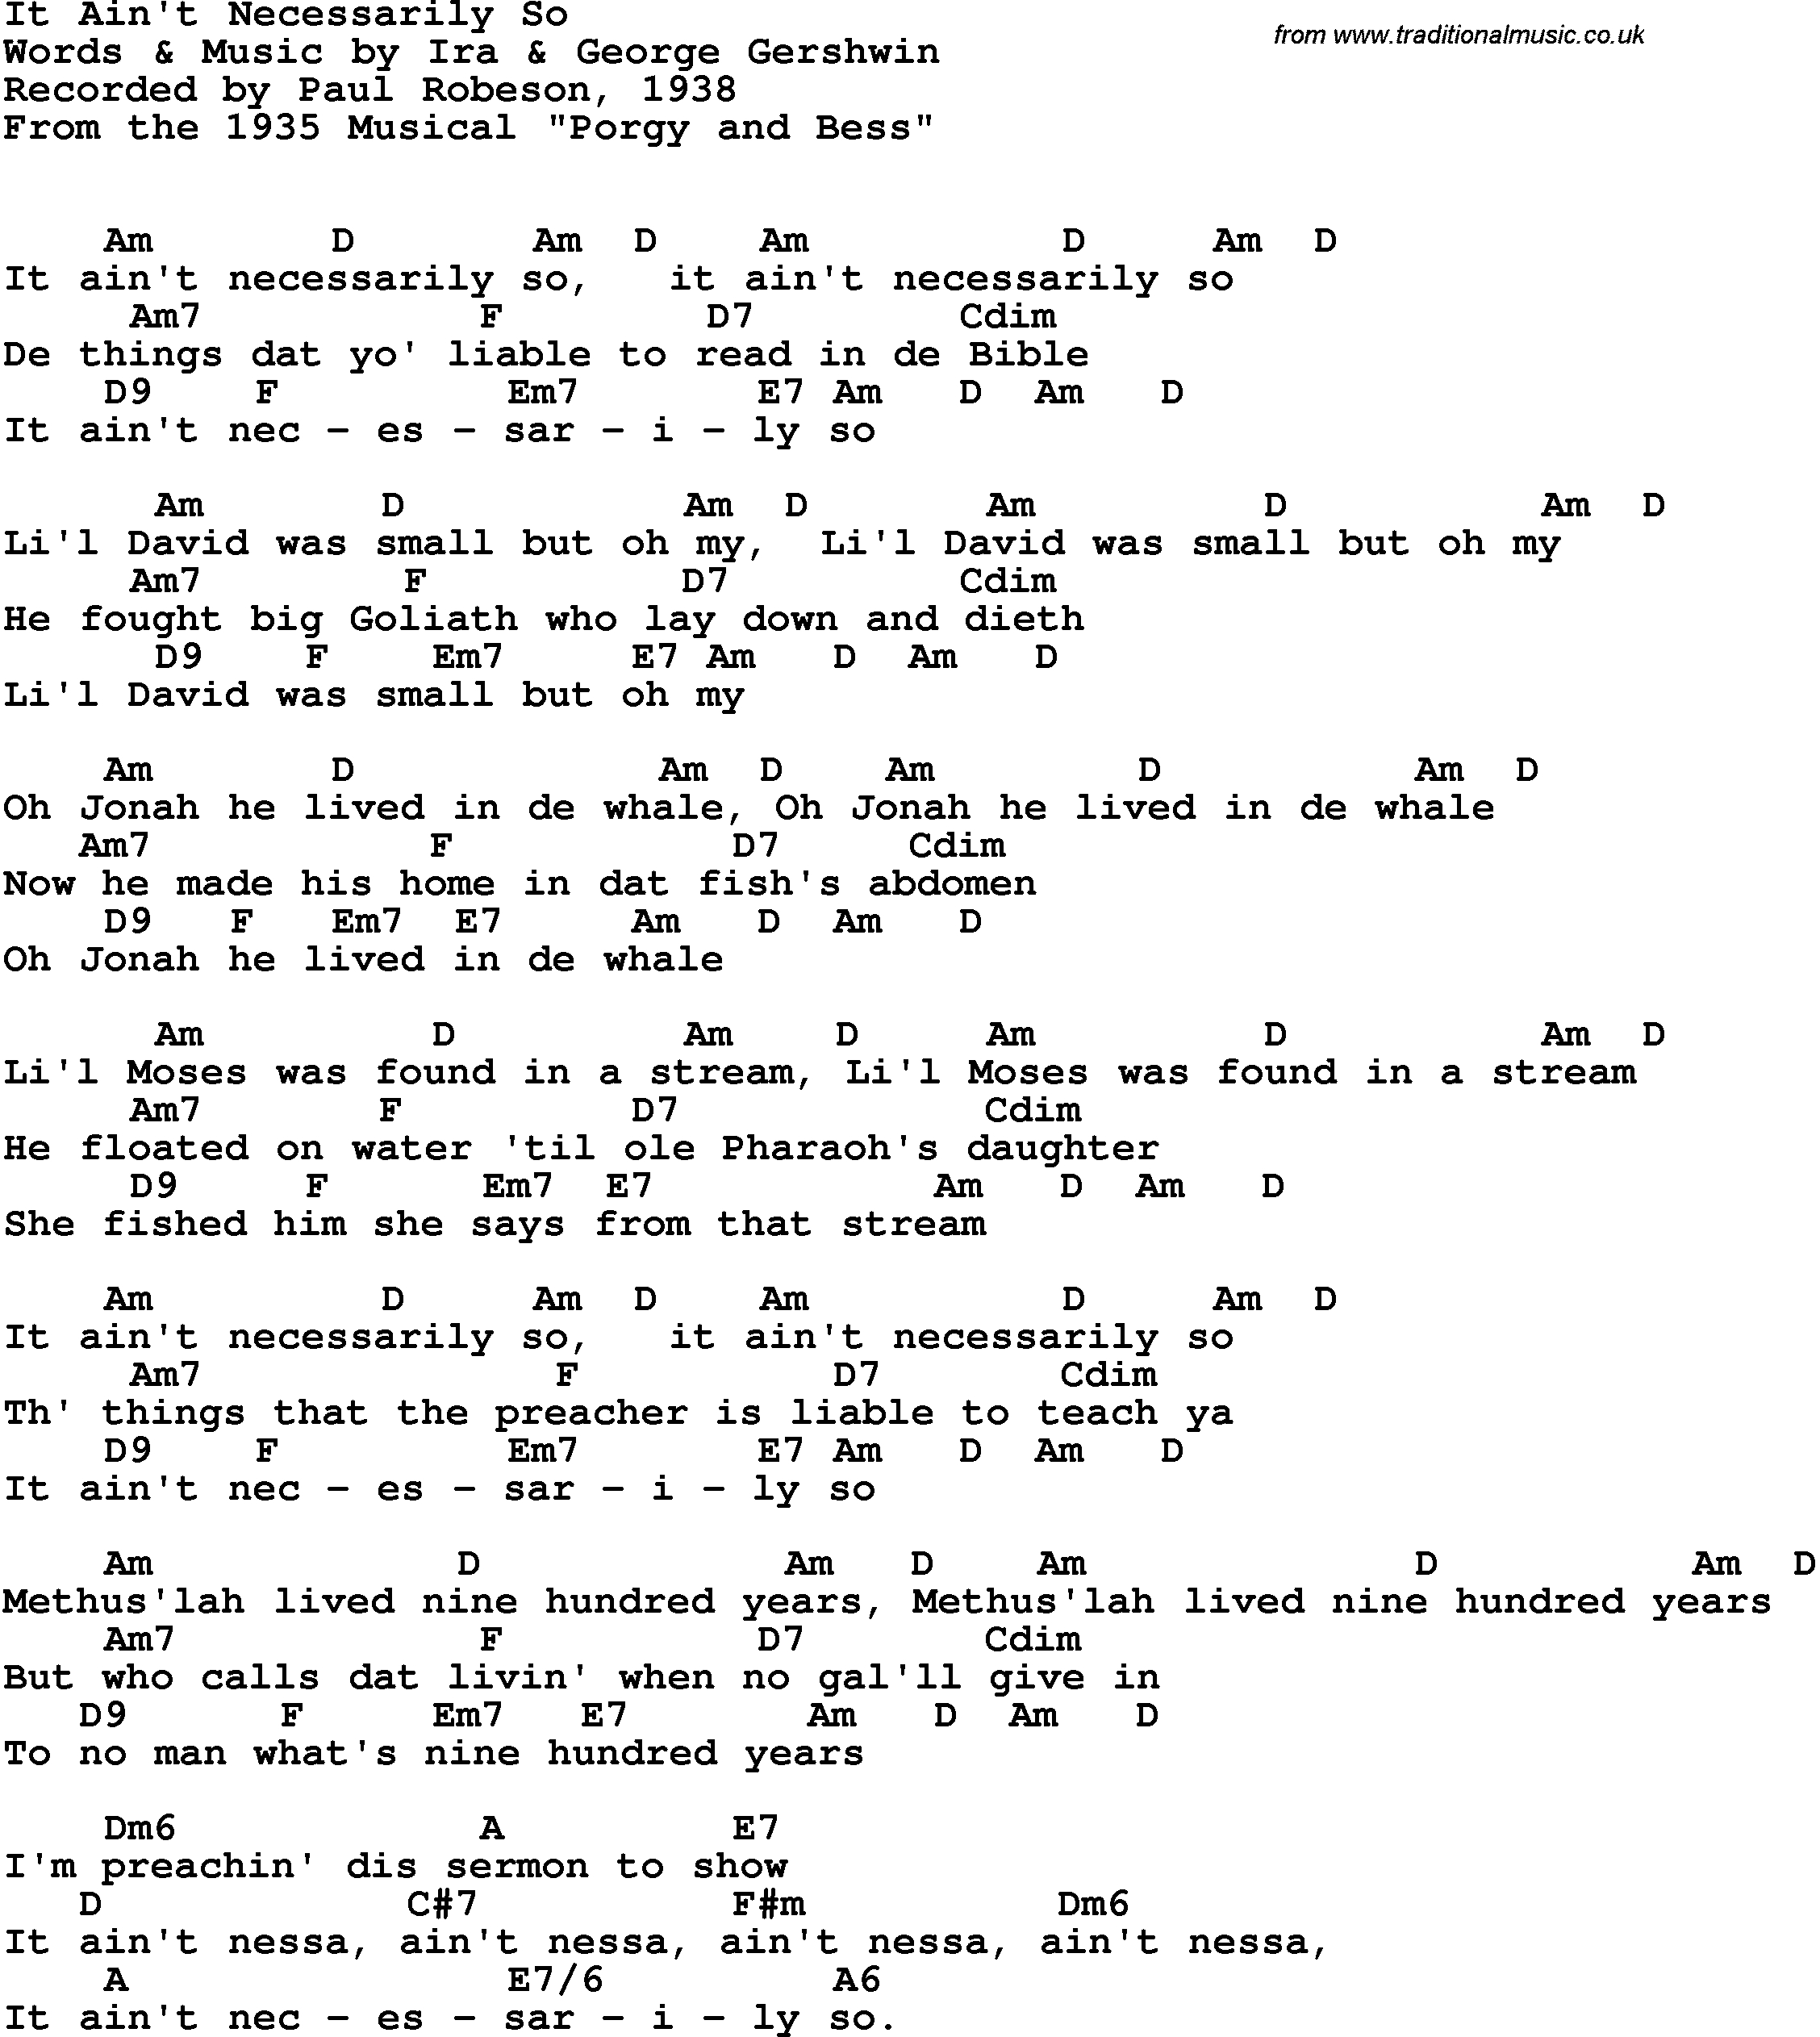 Ain T No Sunshine Chords Song Lyrics With Guitar Chords For It Aint Necessarily So Paul